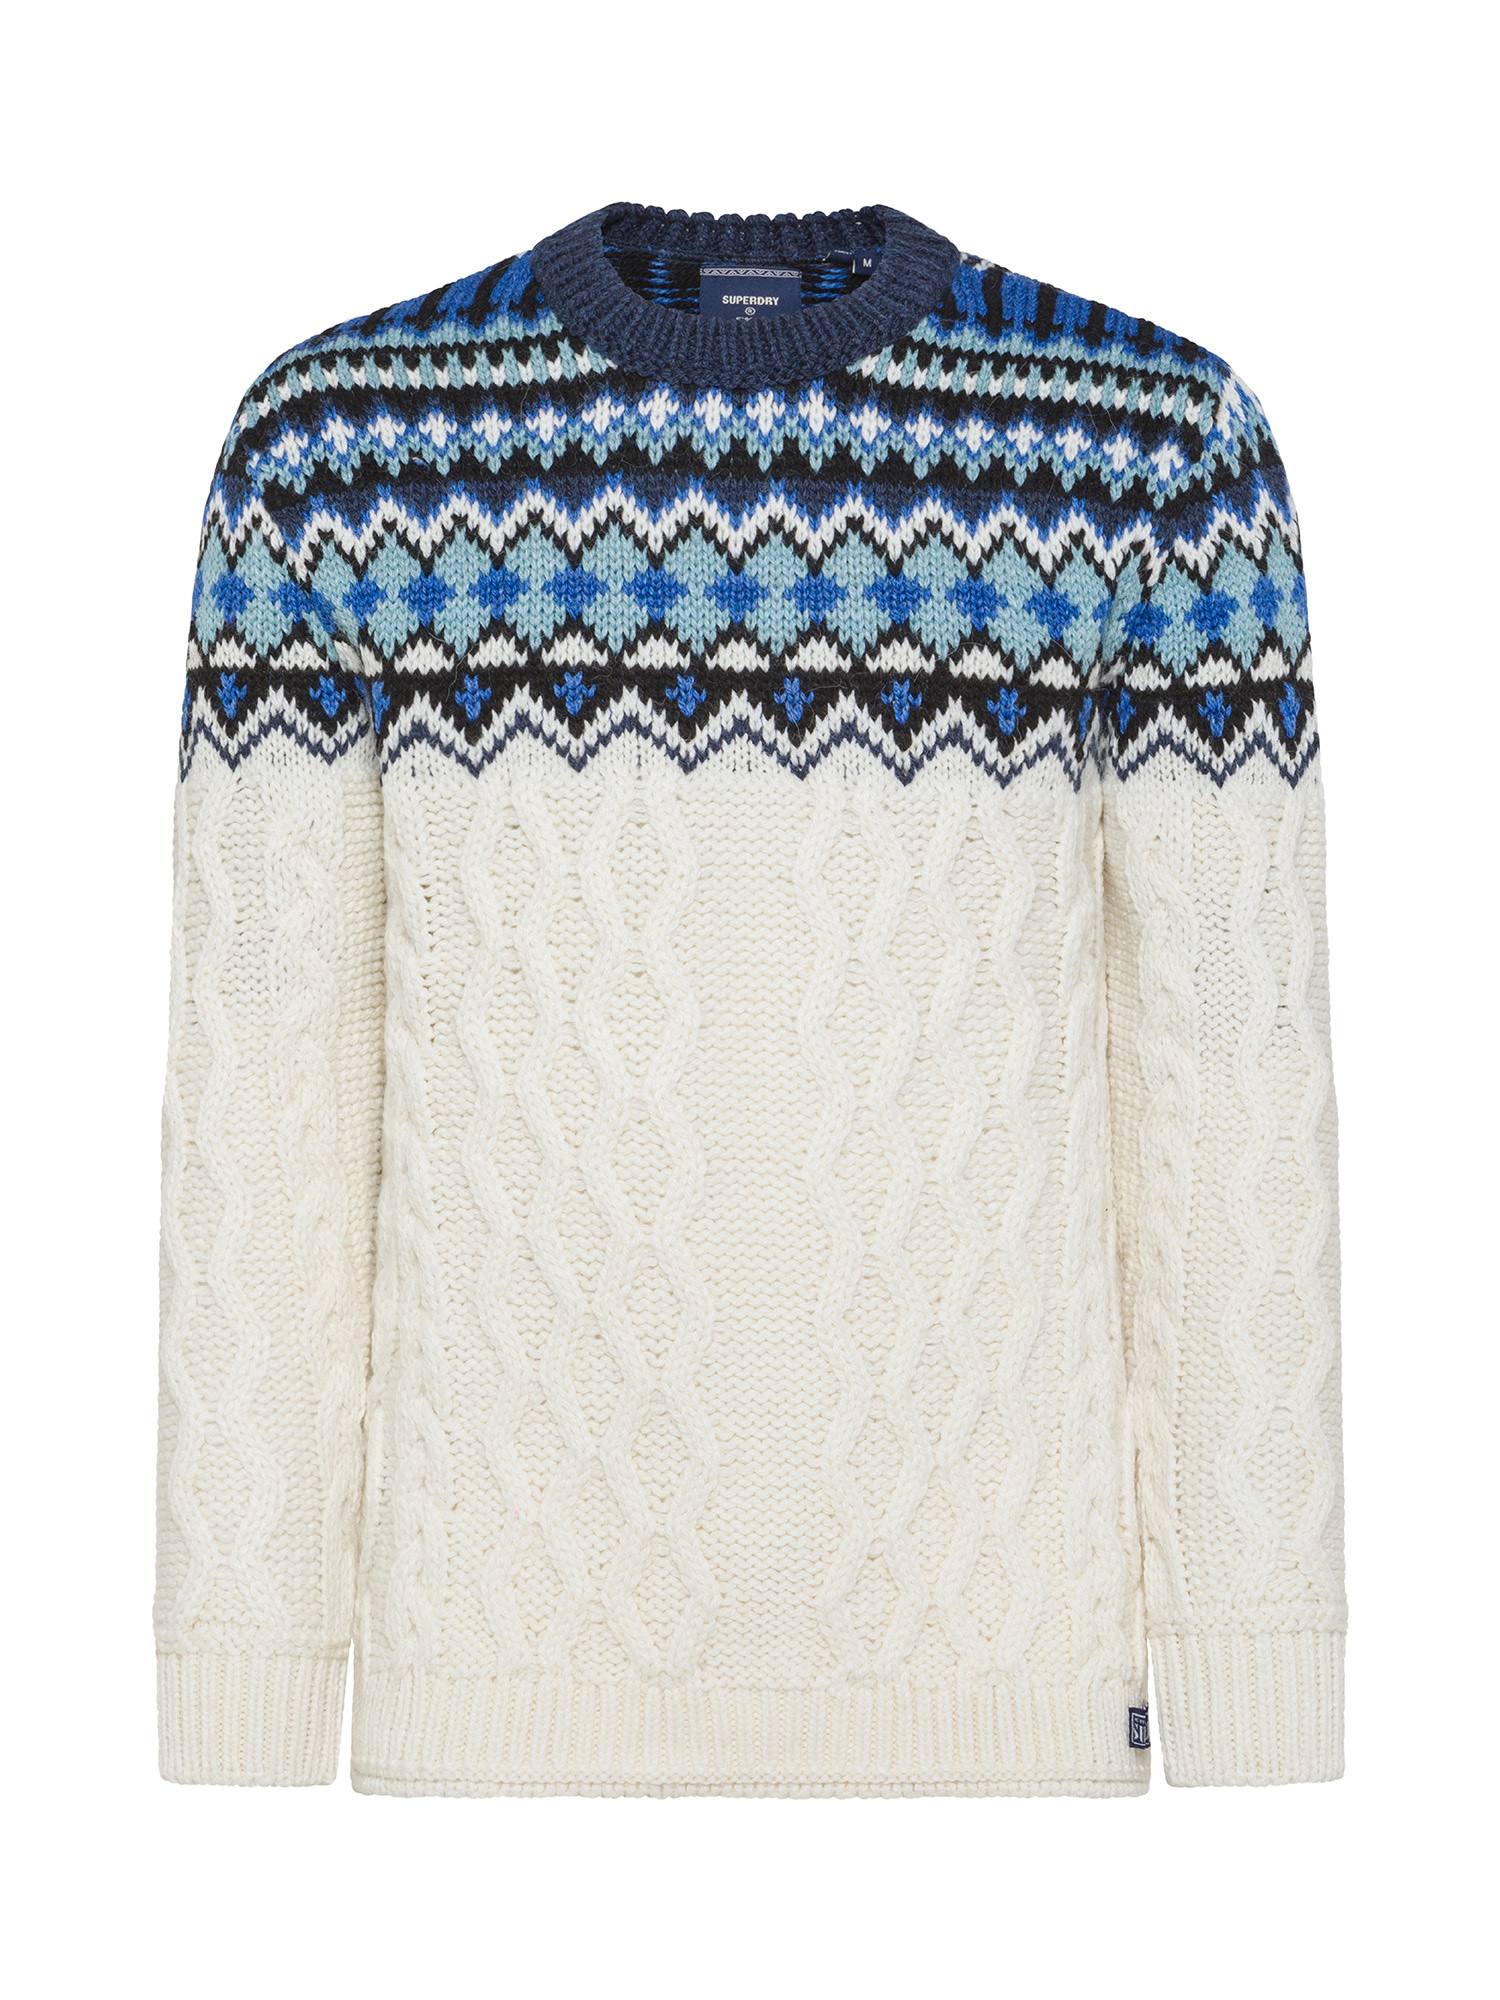 Superdry - Maglione girocollo Fair Isle, Bianco, large image number 0